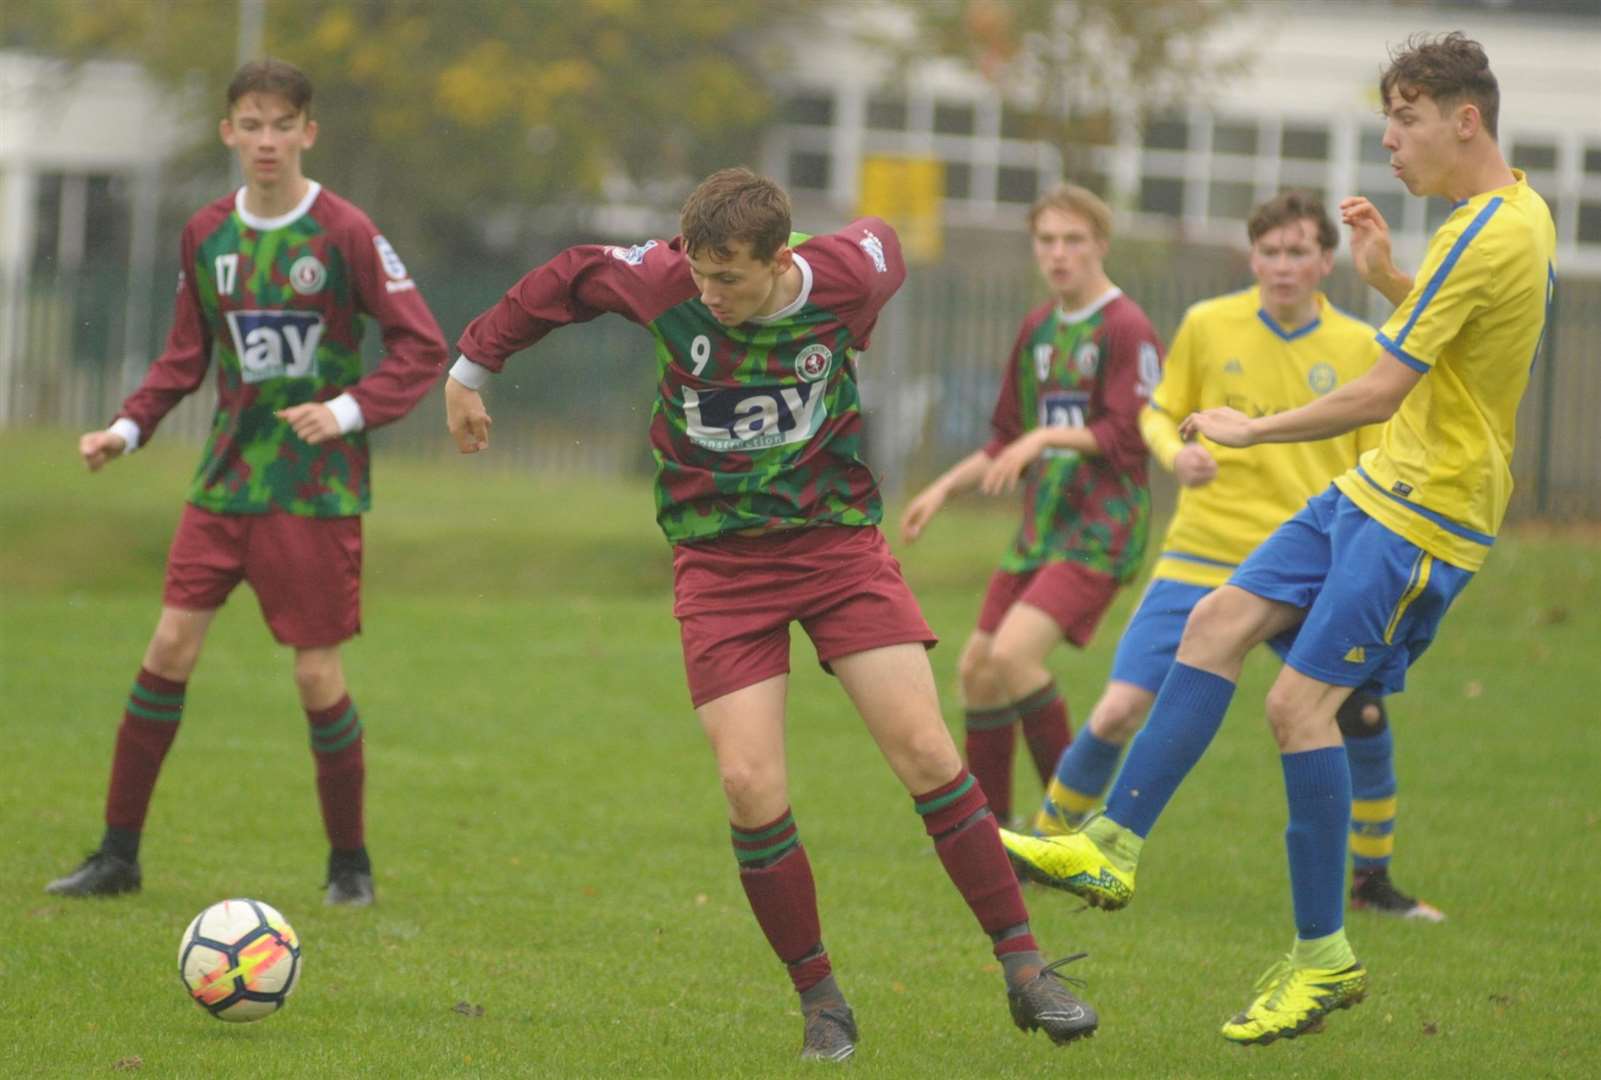 Strood 87 under-16s (yellow) and Cobham Colts went head-to-head in Division 1 Picture: Steve Crispe